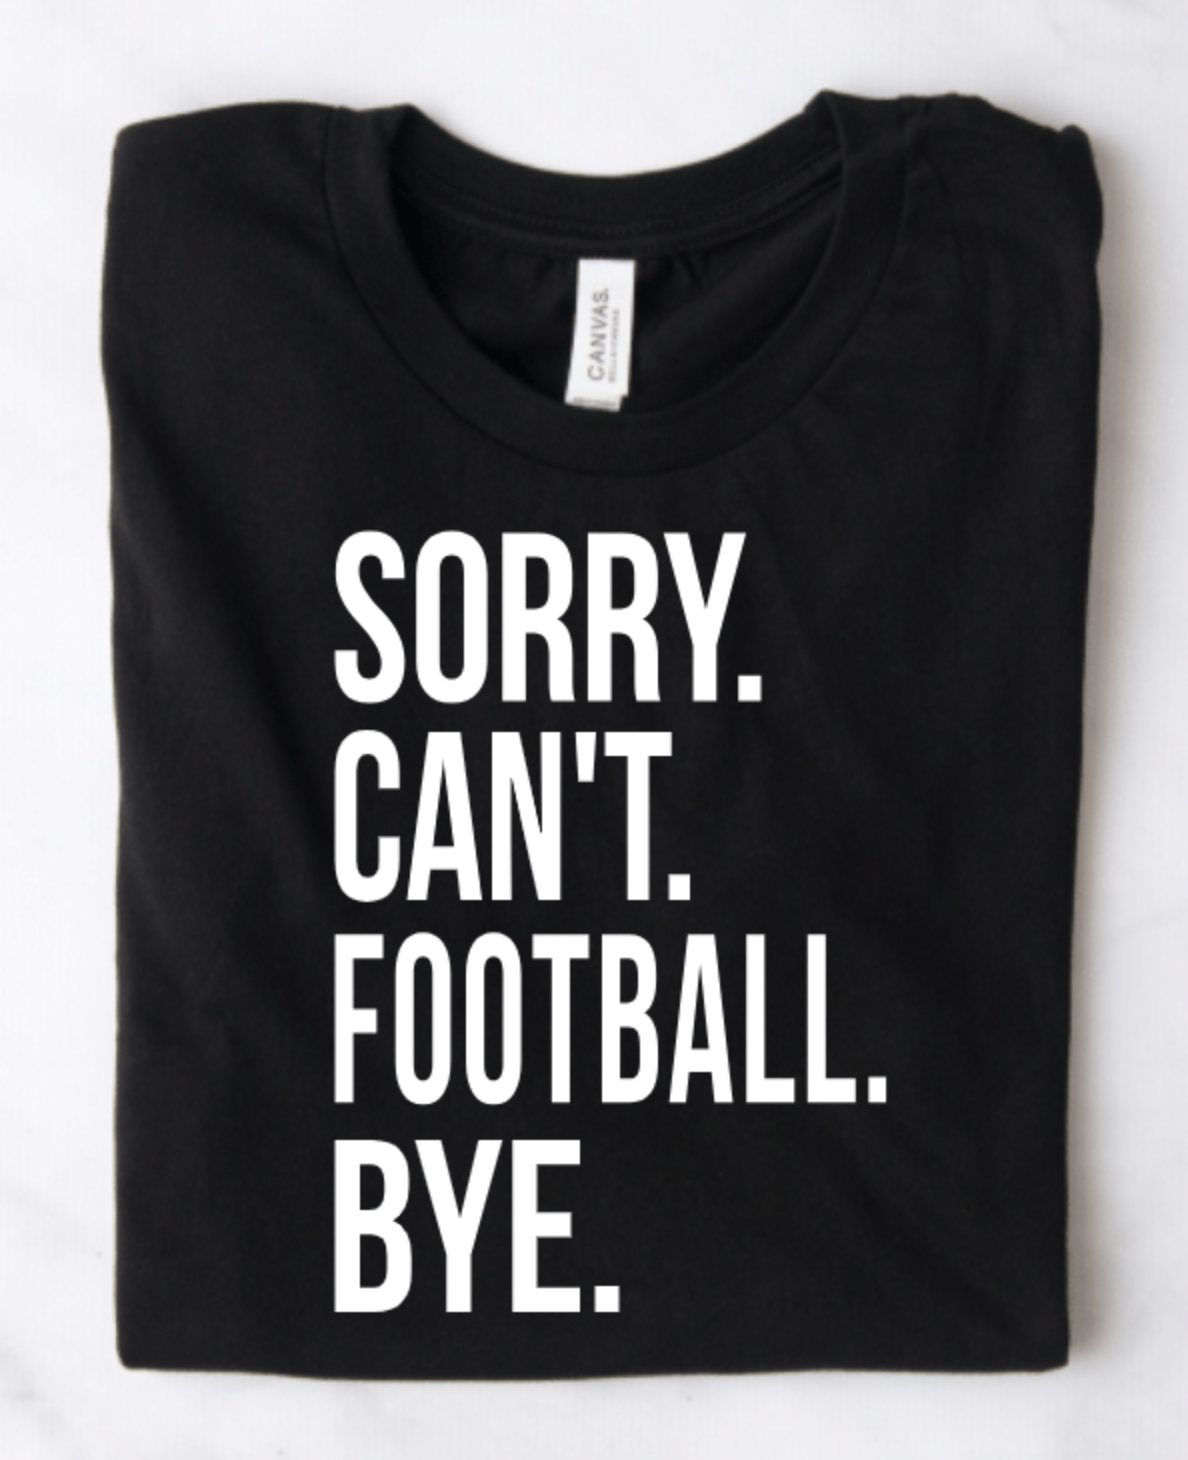 SORRY. CAN'T. FOOTBALL. BYE.